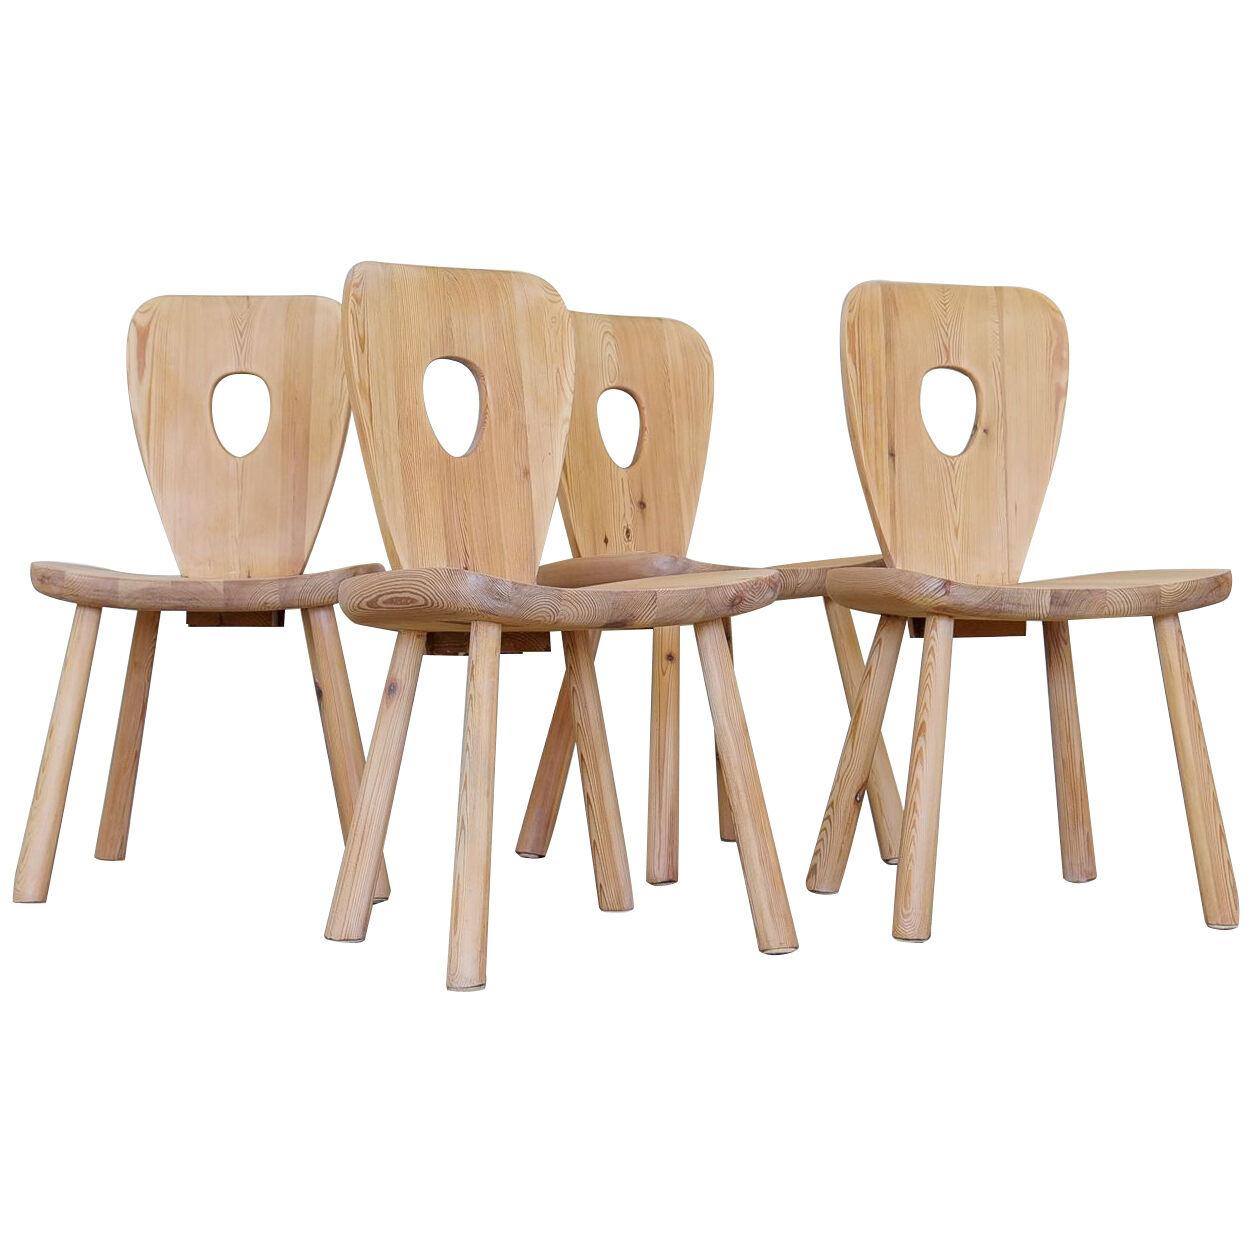 Swedish Sculptural Dining Chairs in Pine Bo Fjaestad, Sweden 1930s